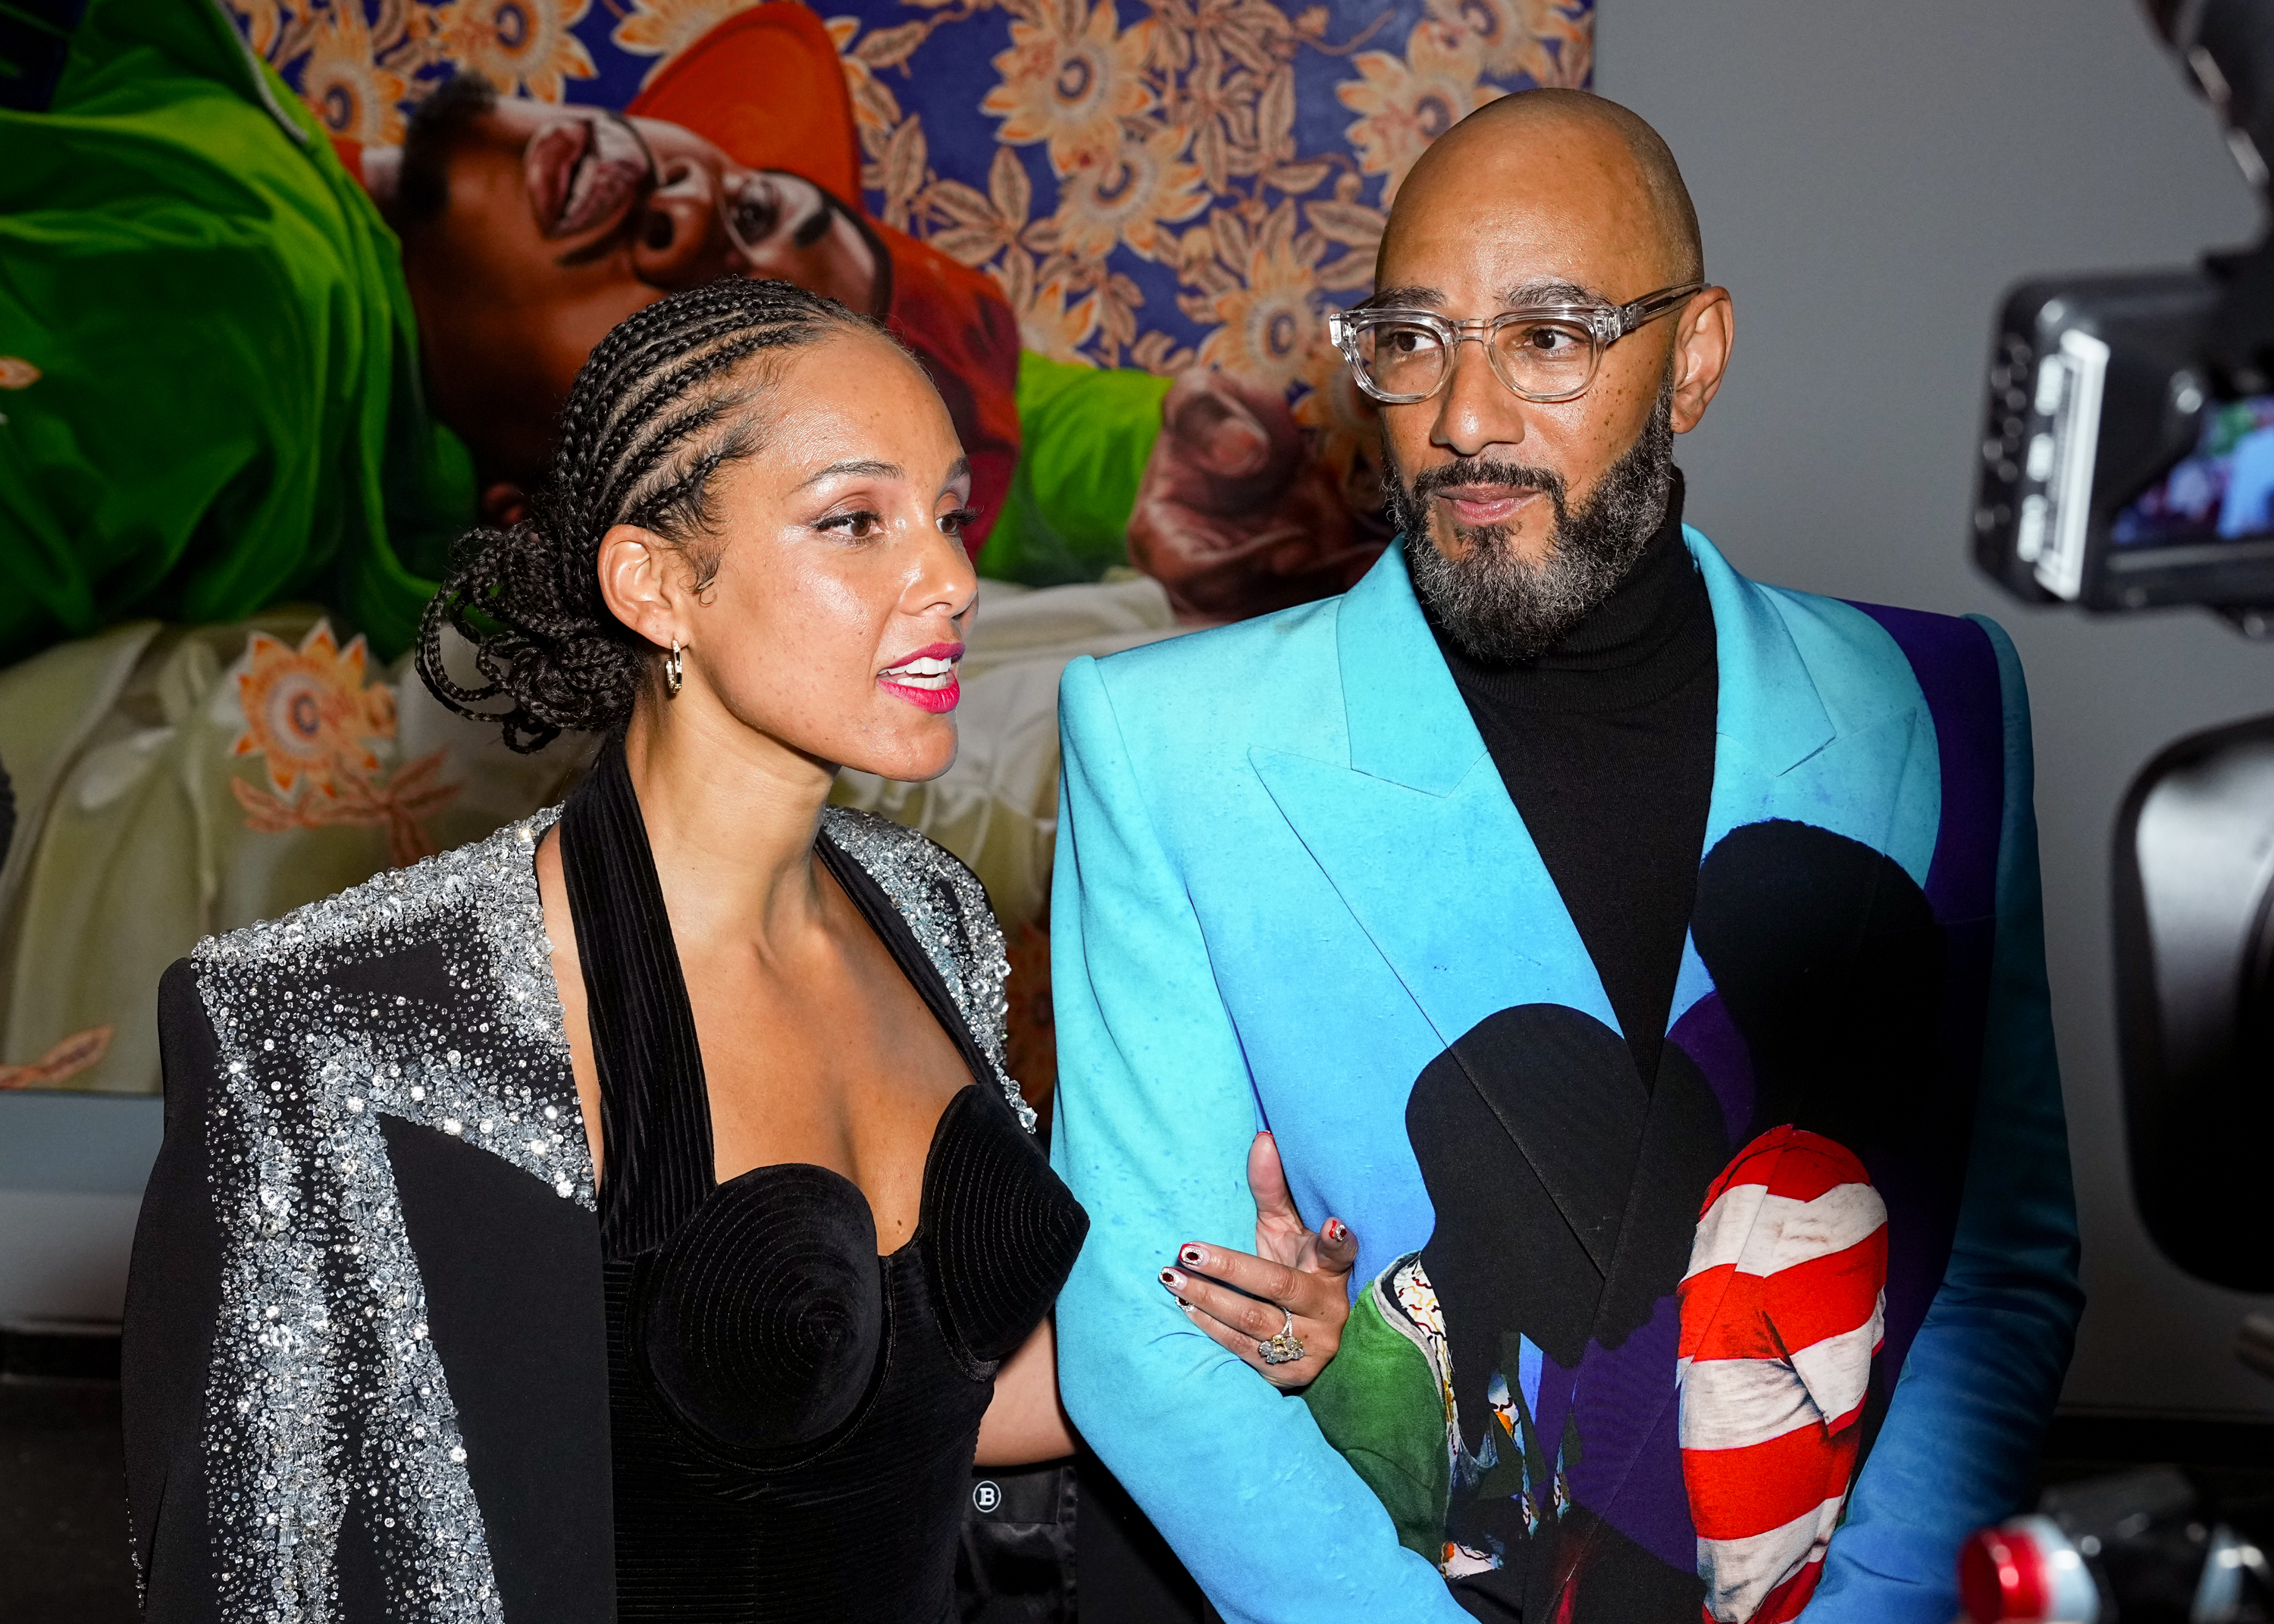 Alicia and Swizz Beatz people stand together; one in a sequined outfit, the other in a blue blazer with a graphic t-shirt, before artwork